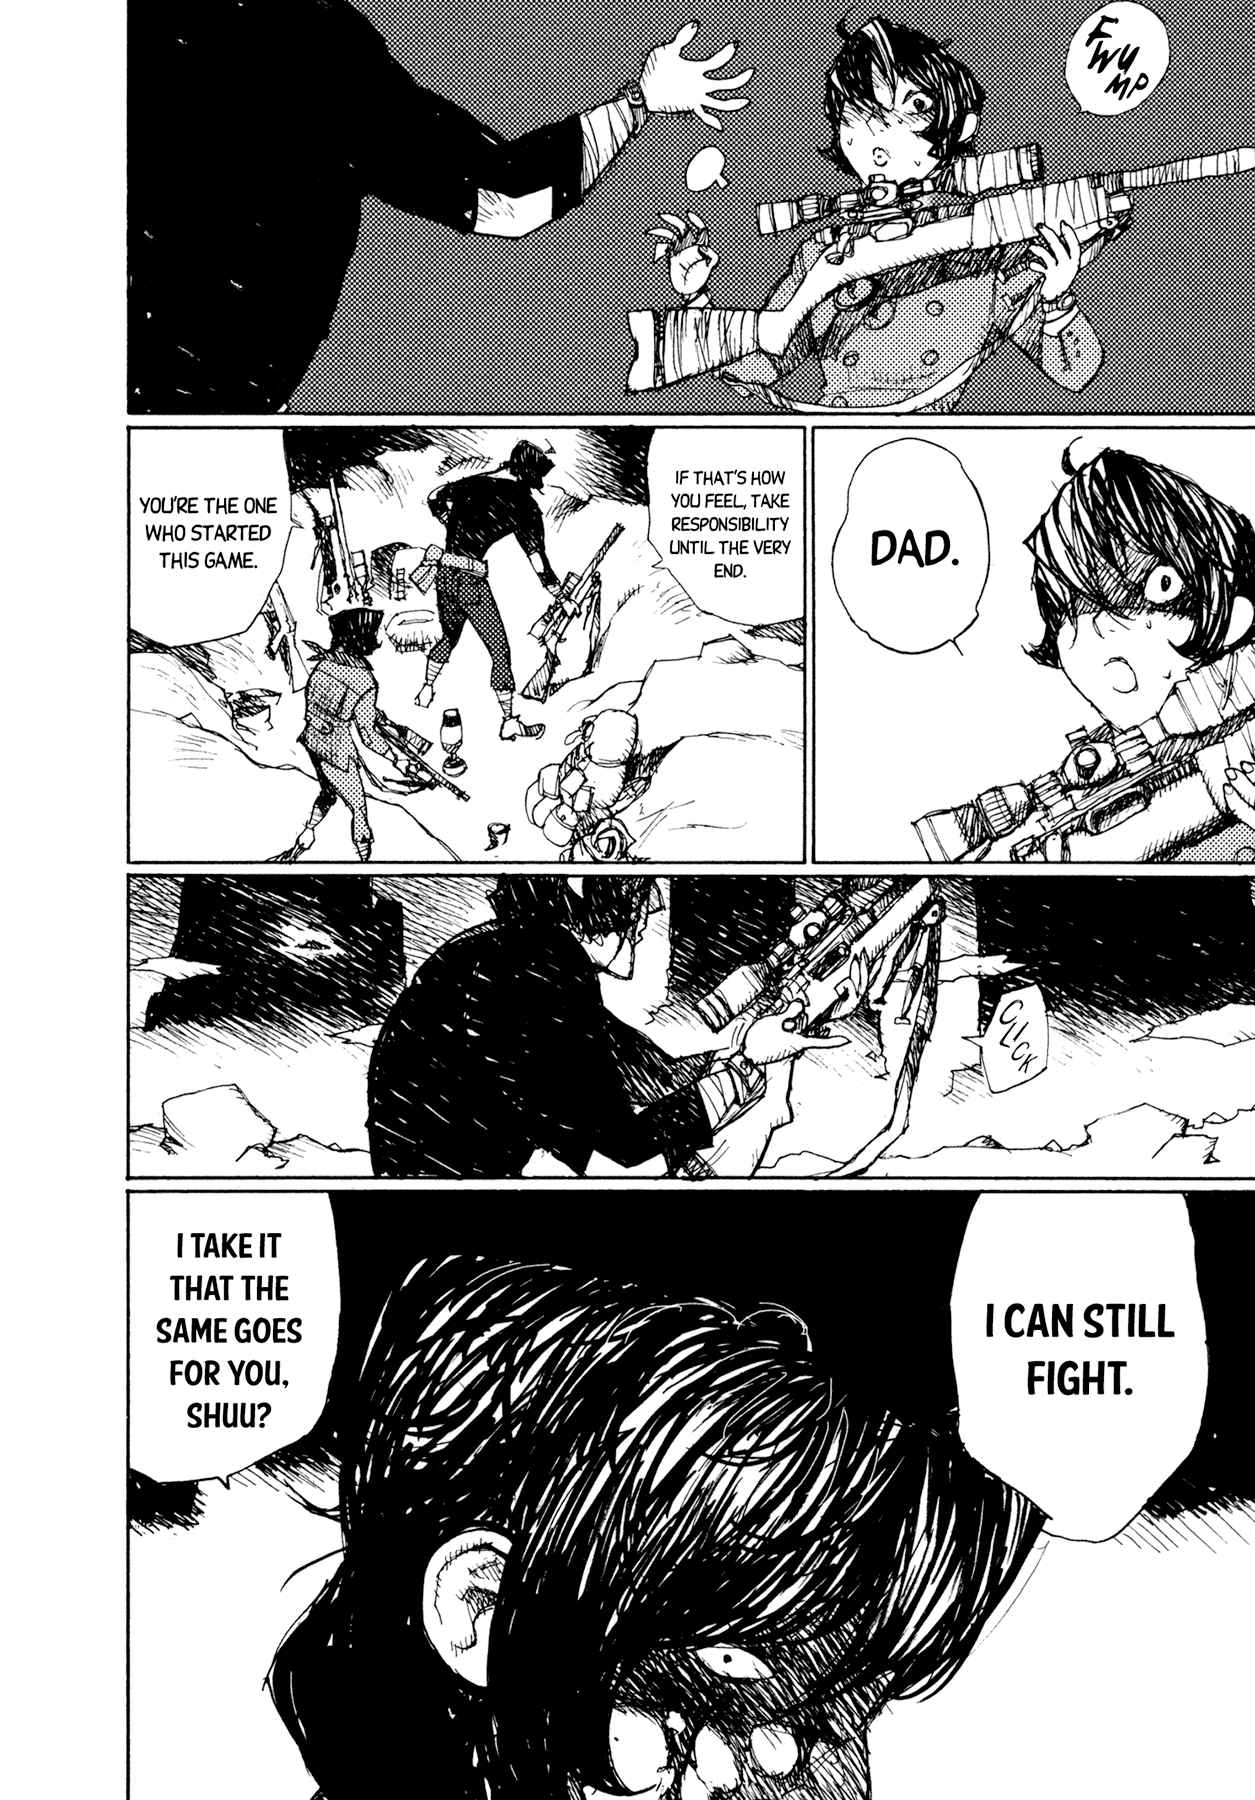 Alice in Hell Vol. 4 Ch. 27 I Can Still Fight